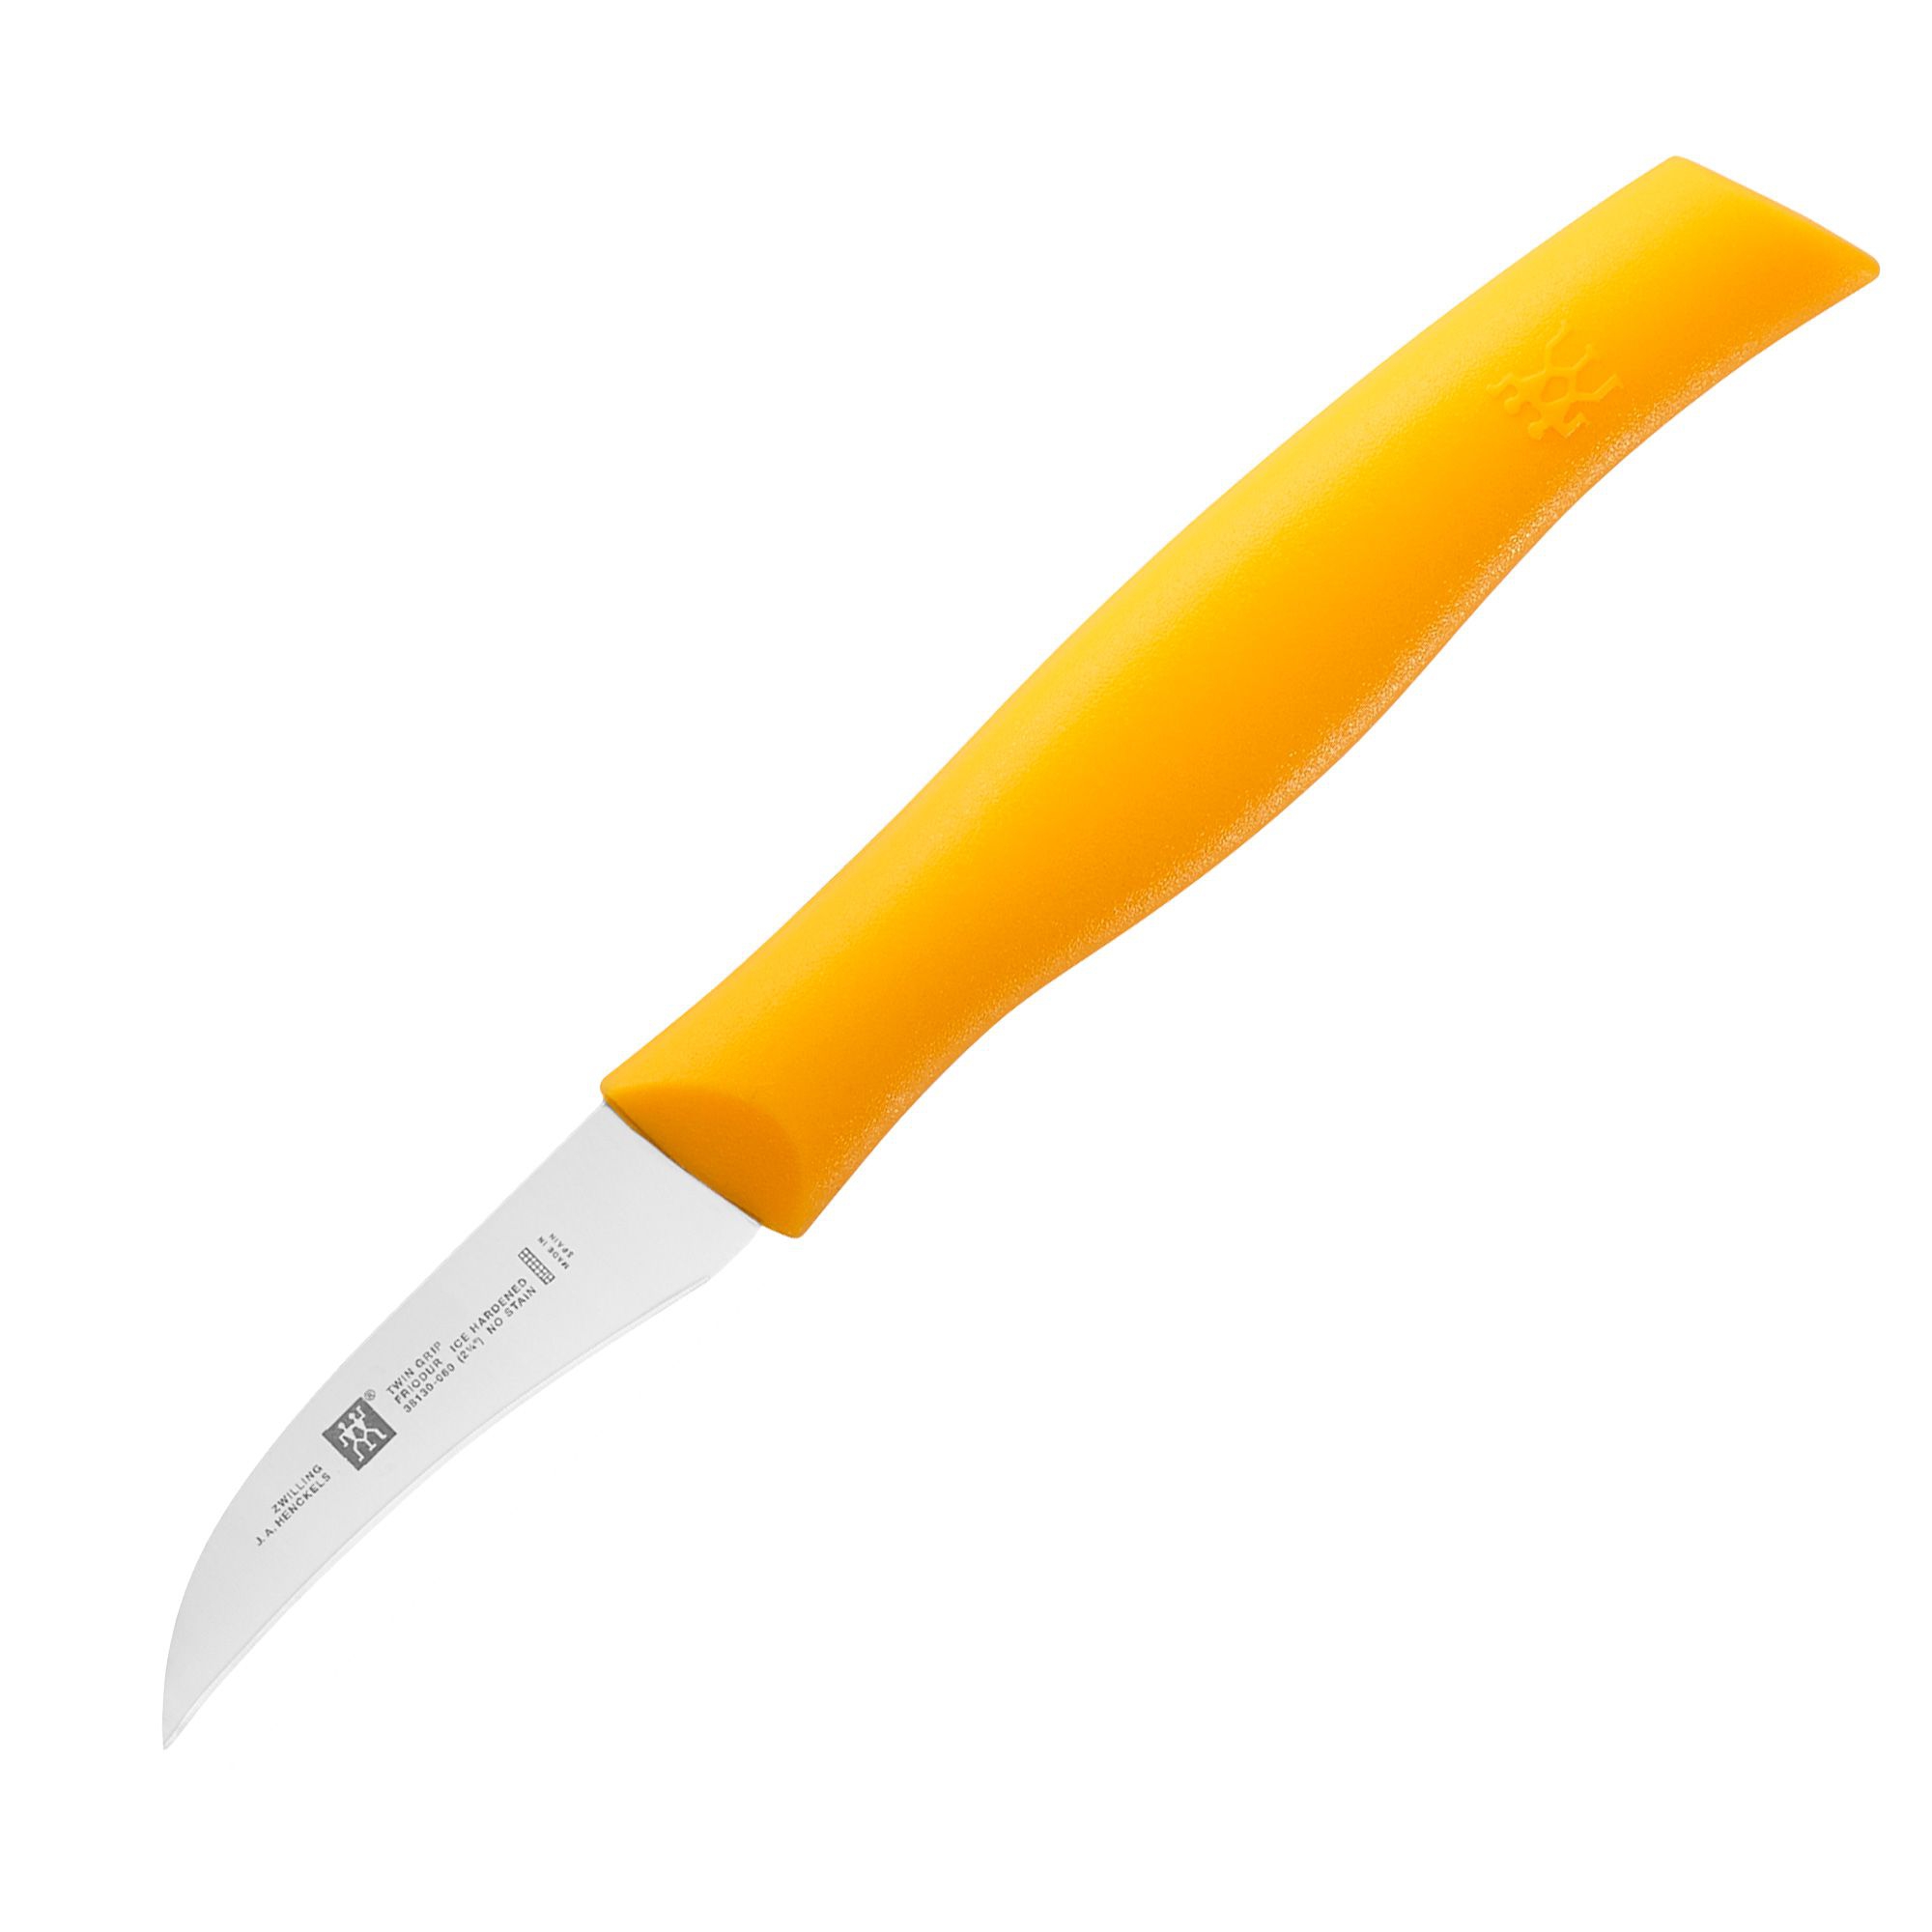 Zwilling - TWIN Grip paring knife 6cm, yellow